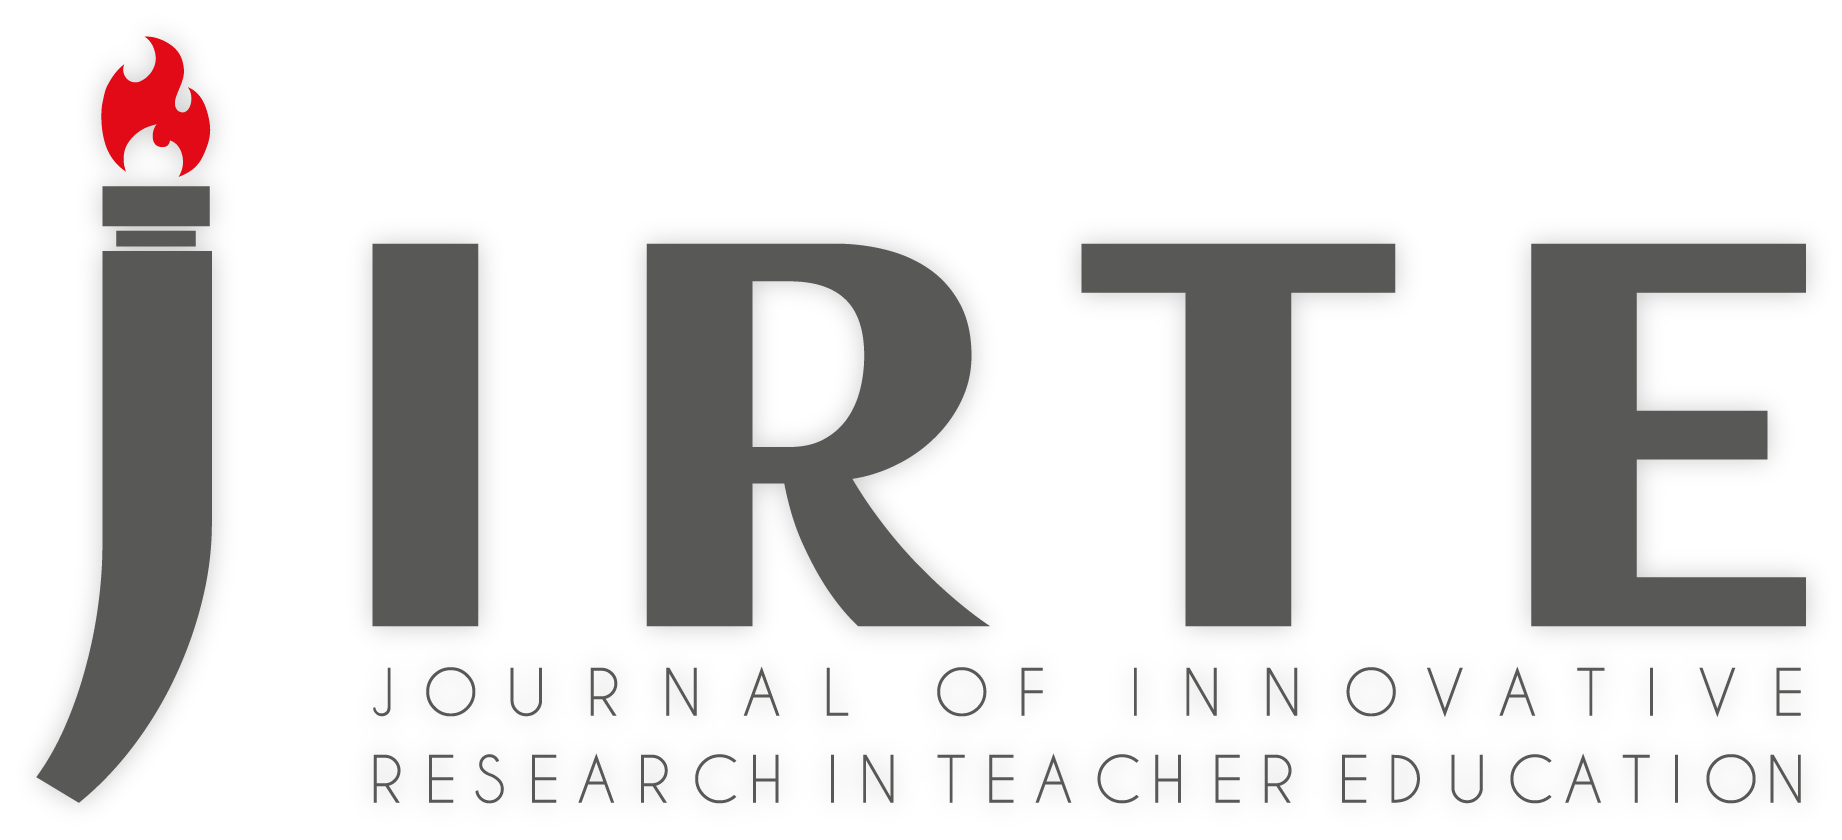 Journal of Innovative Research in Teacher Education